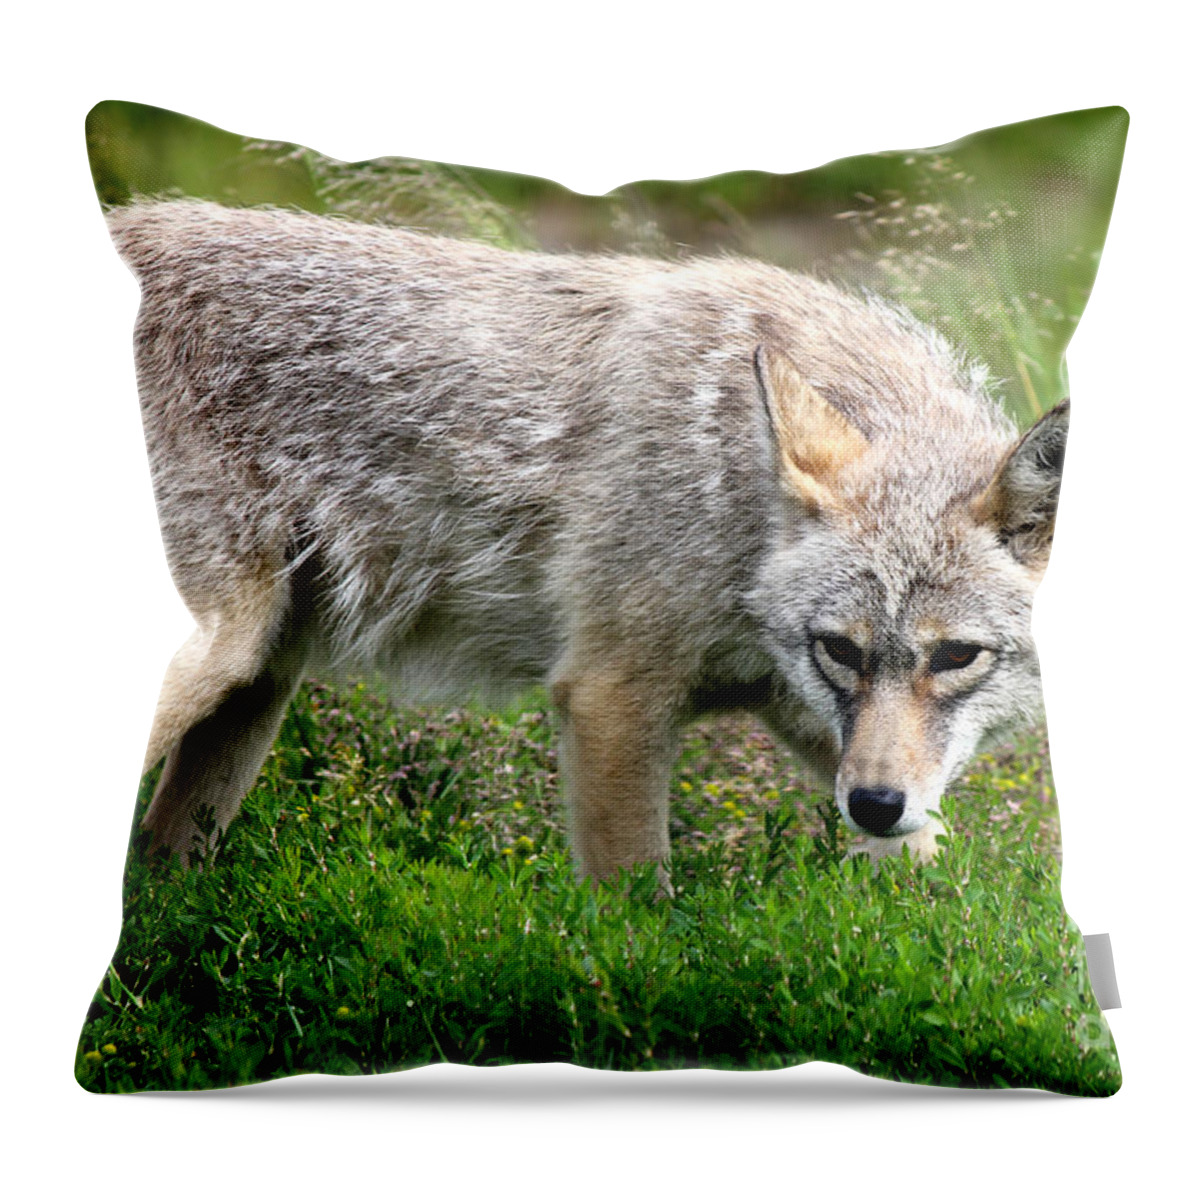 Coyotes Throw Pillow featuring the photograph Coyote On The Prowl by Kathy White